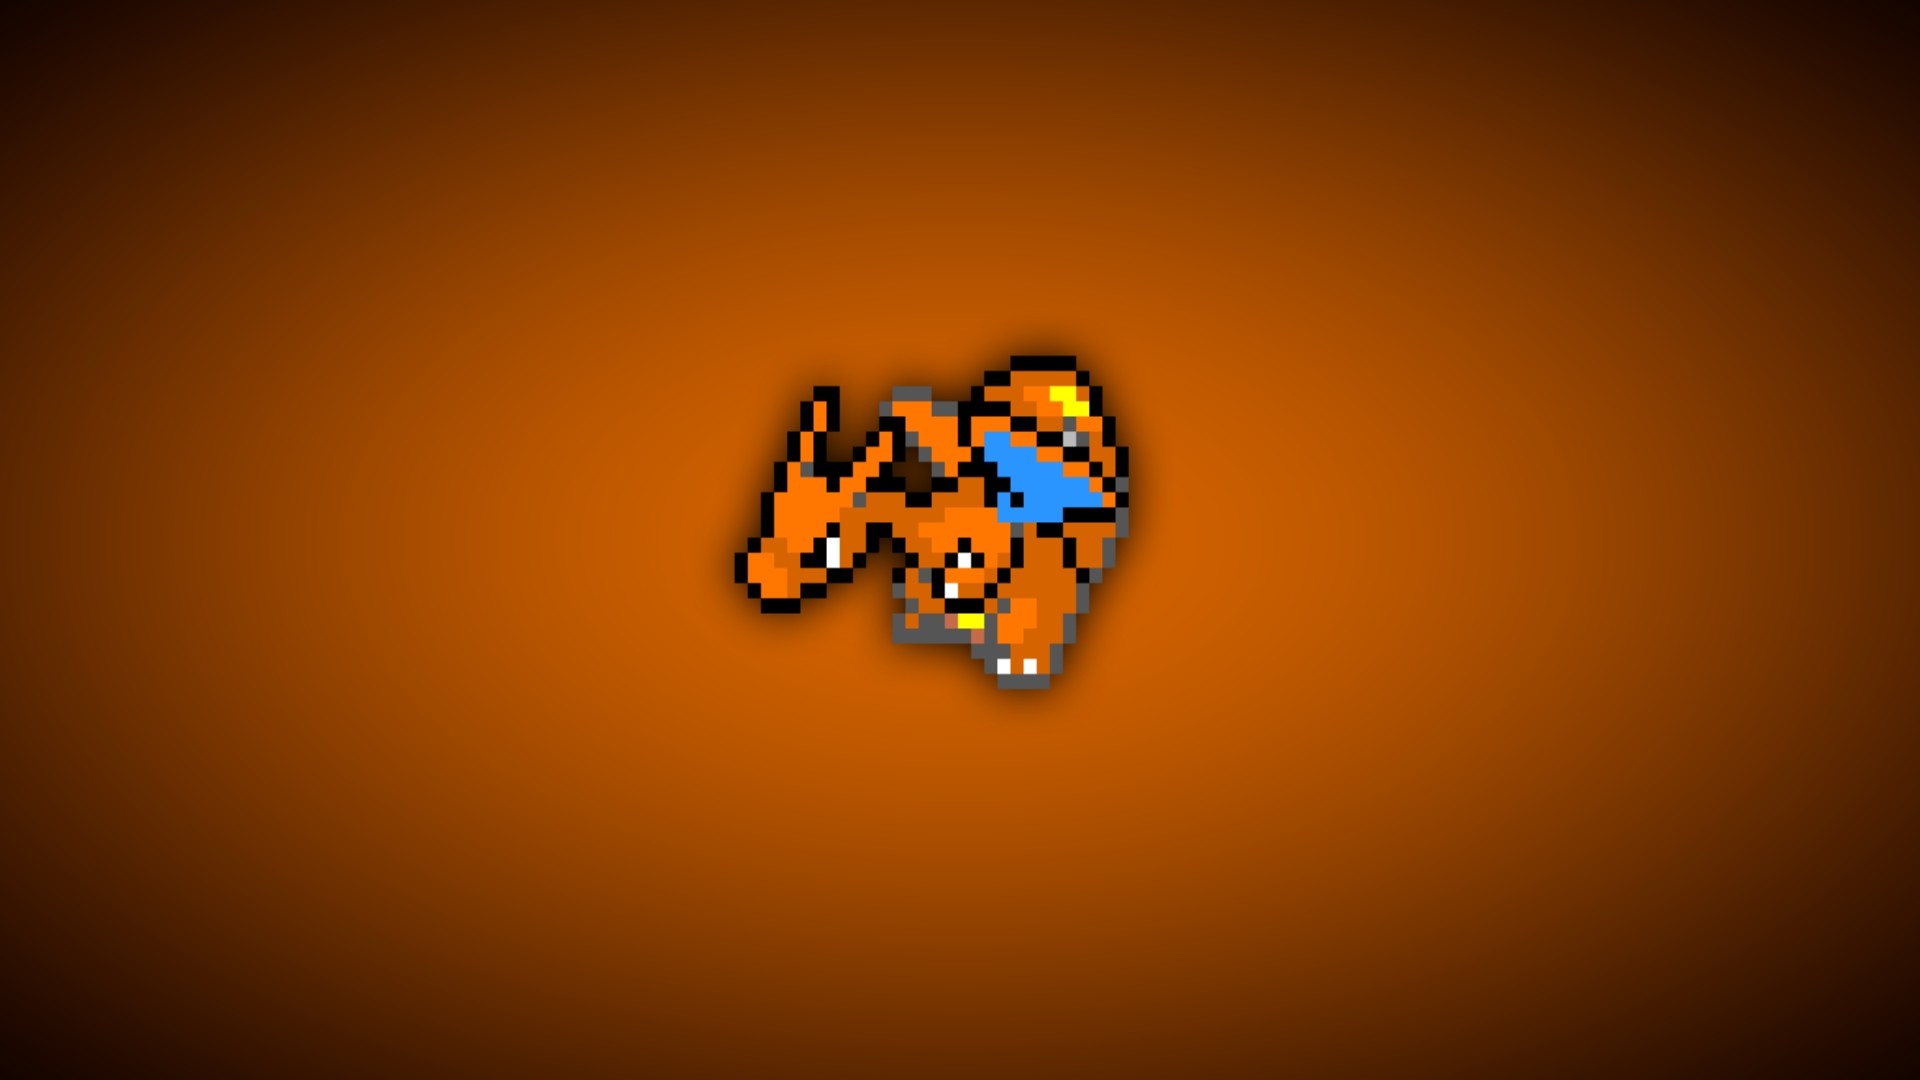 1920x1080 Charizard Backgrounds - Wallpaper Cave | Images Wallpapers | Pinterest |  Digimon, Wallpaper and Hd wallpaper